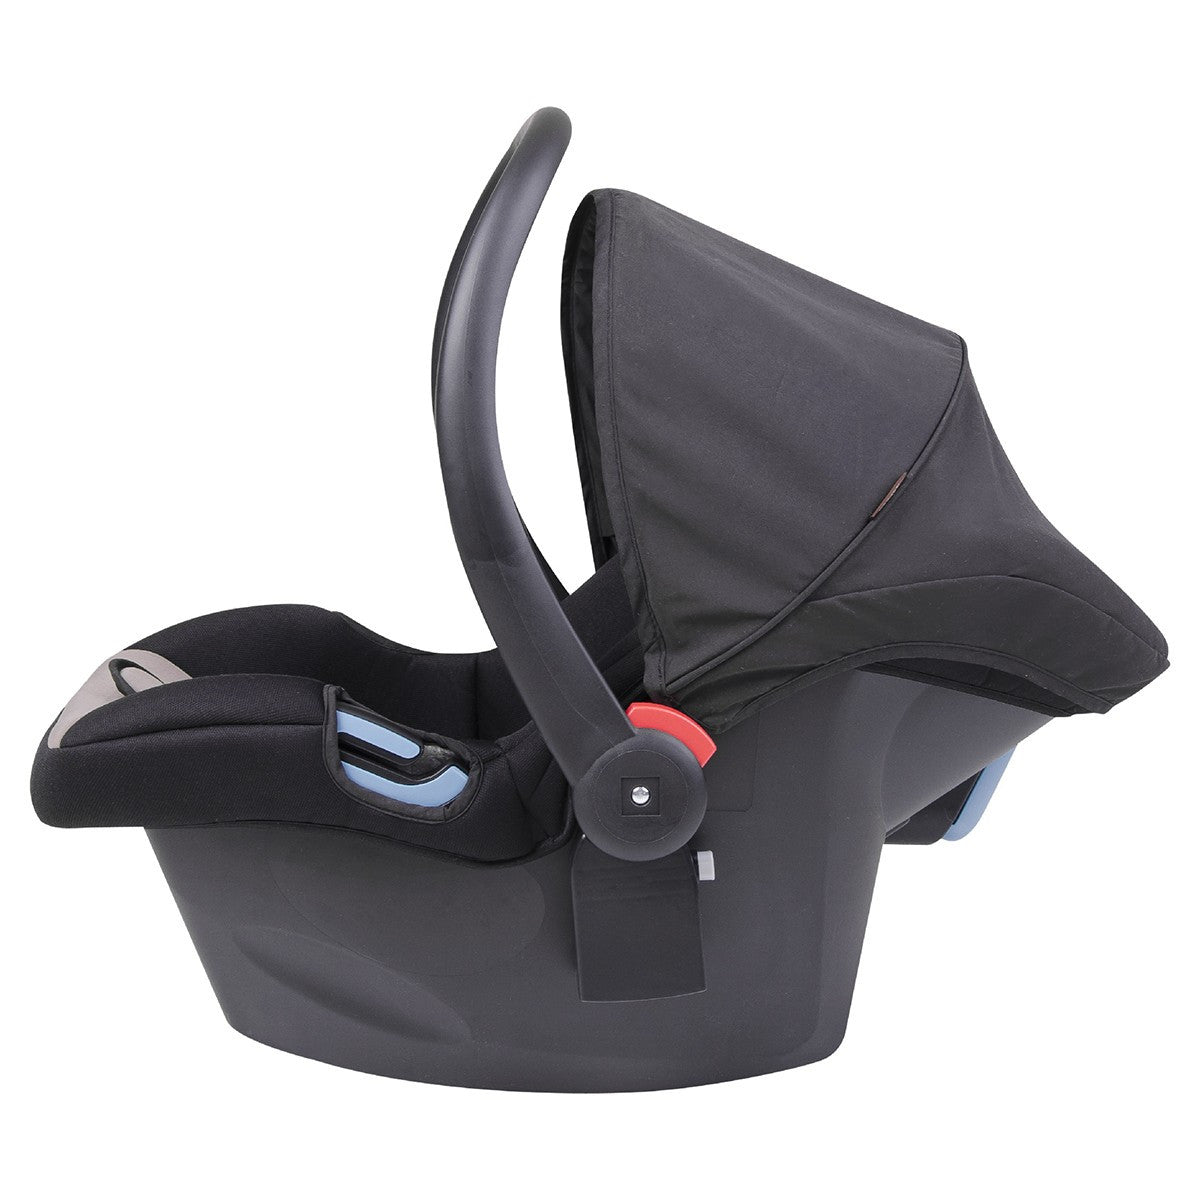 MB Protect Infant Car Seat